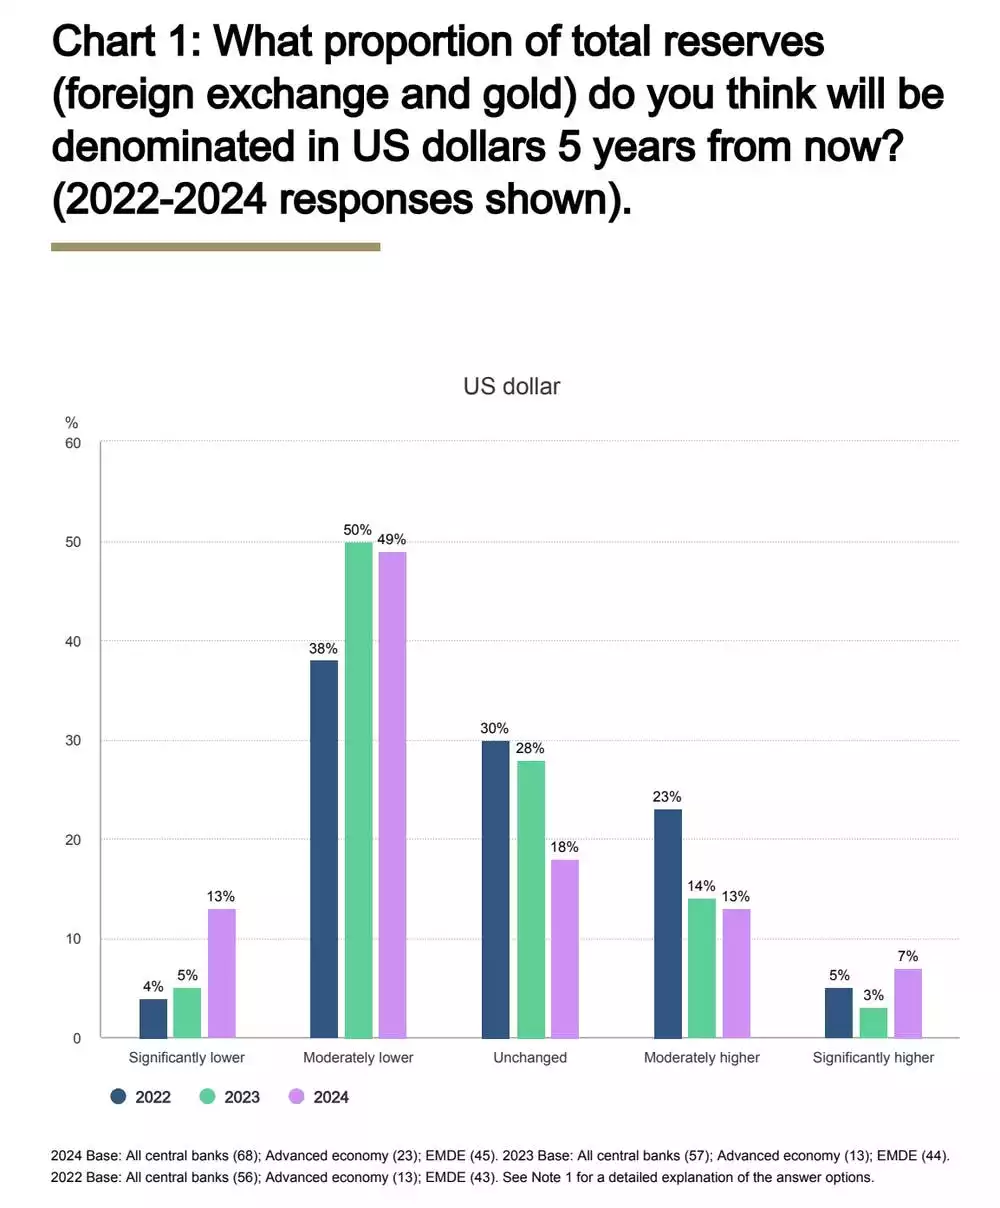 What proportion of total reserves central banks think will be denominated in U.S. dollars 5 years from now